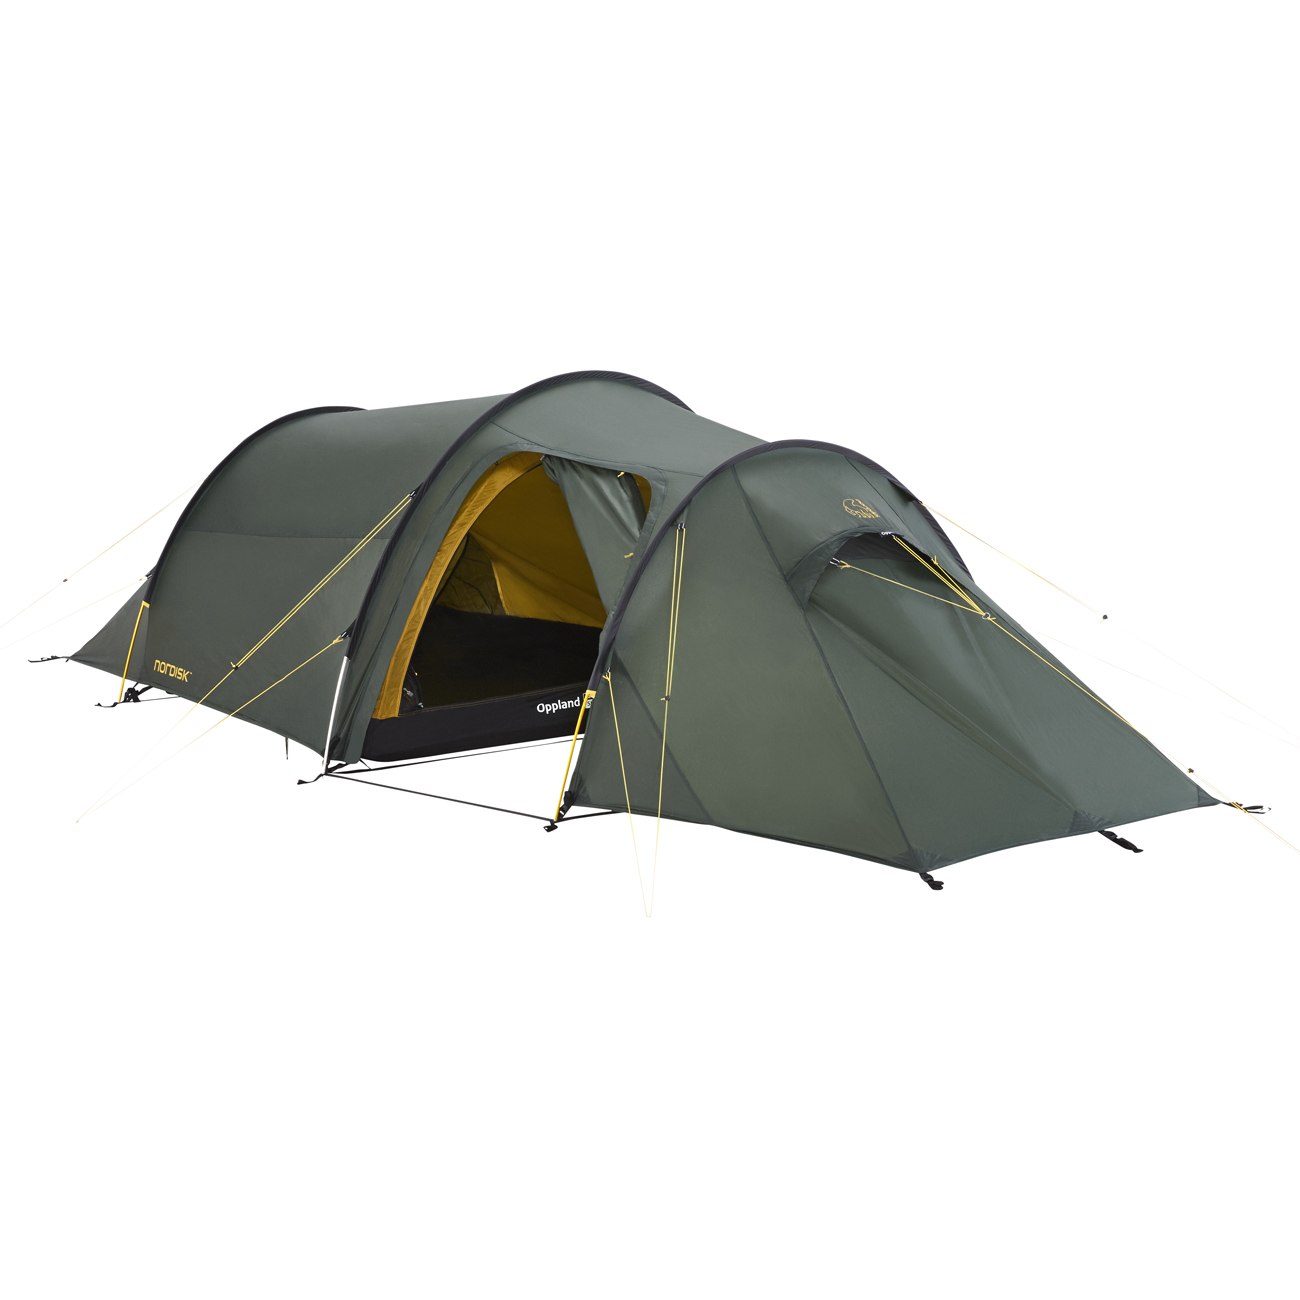 Productfoto van Nordisk Oppland 2 SI Tent - Forest Green